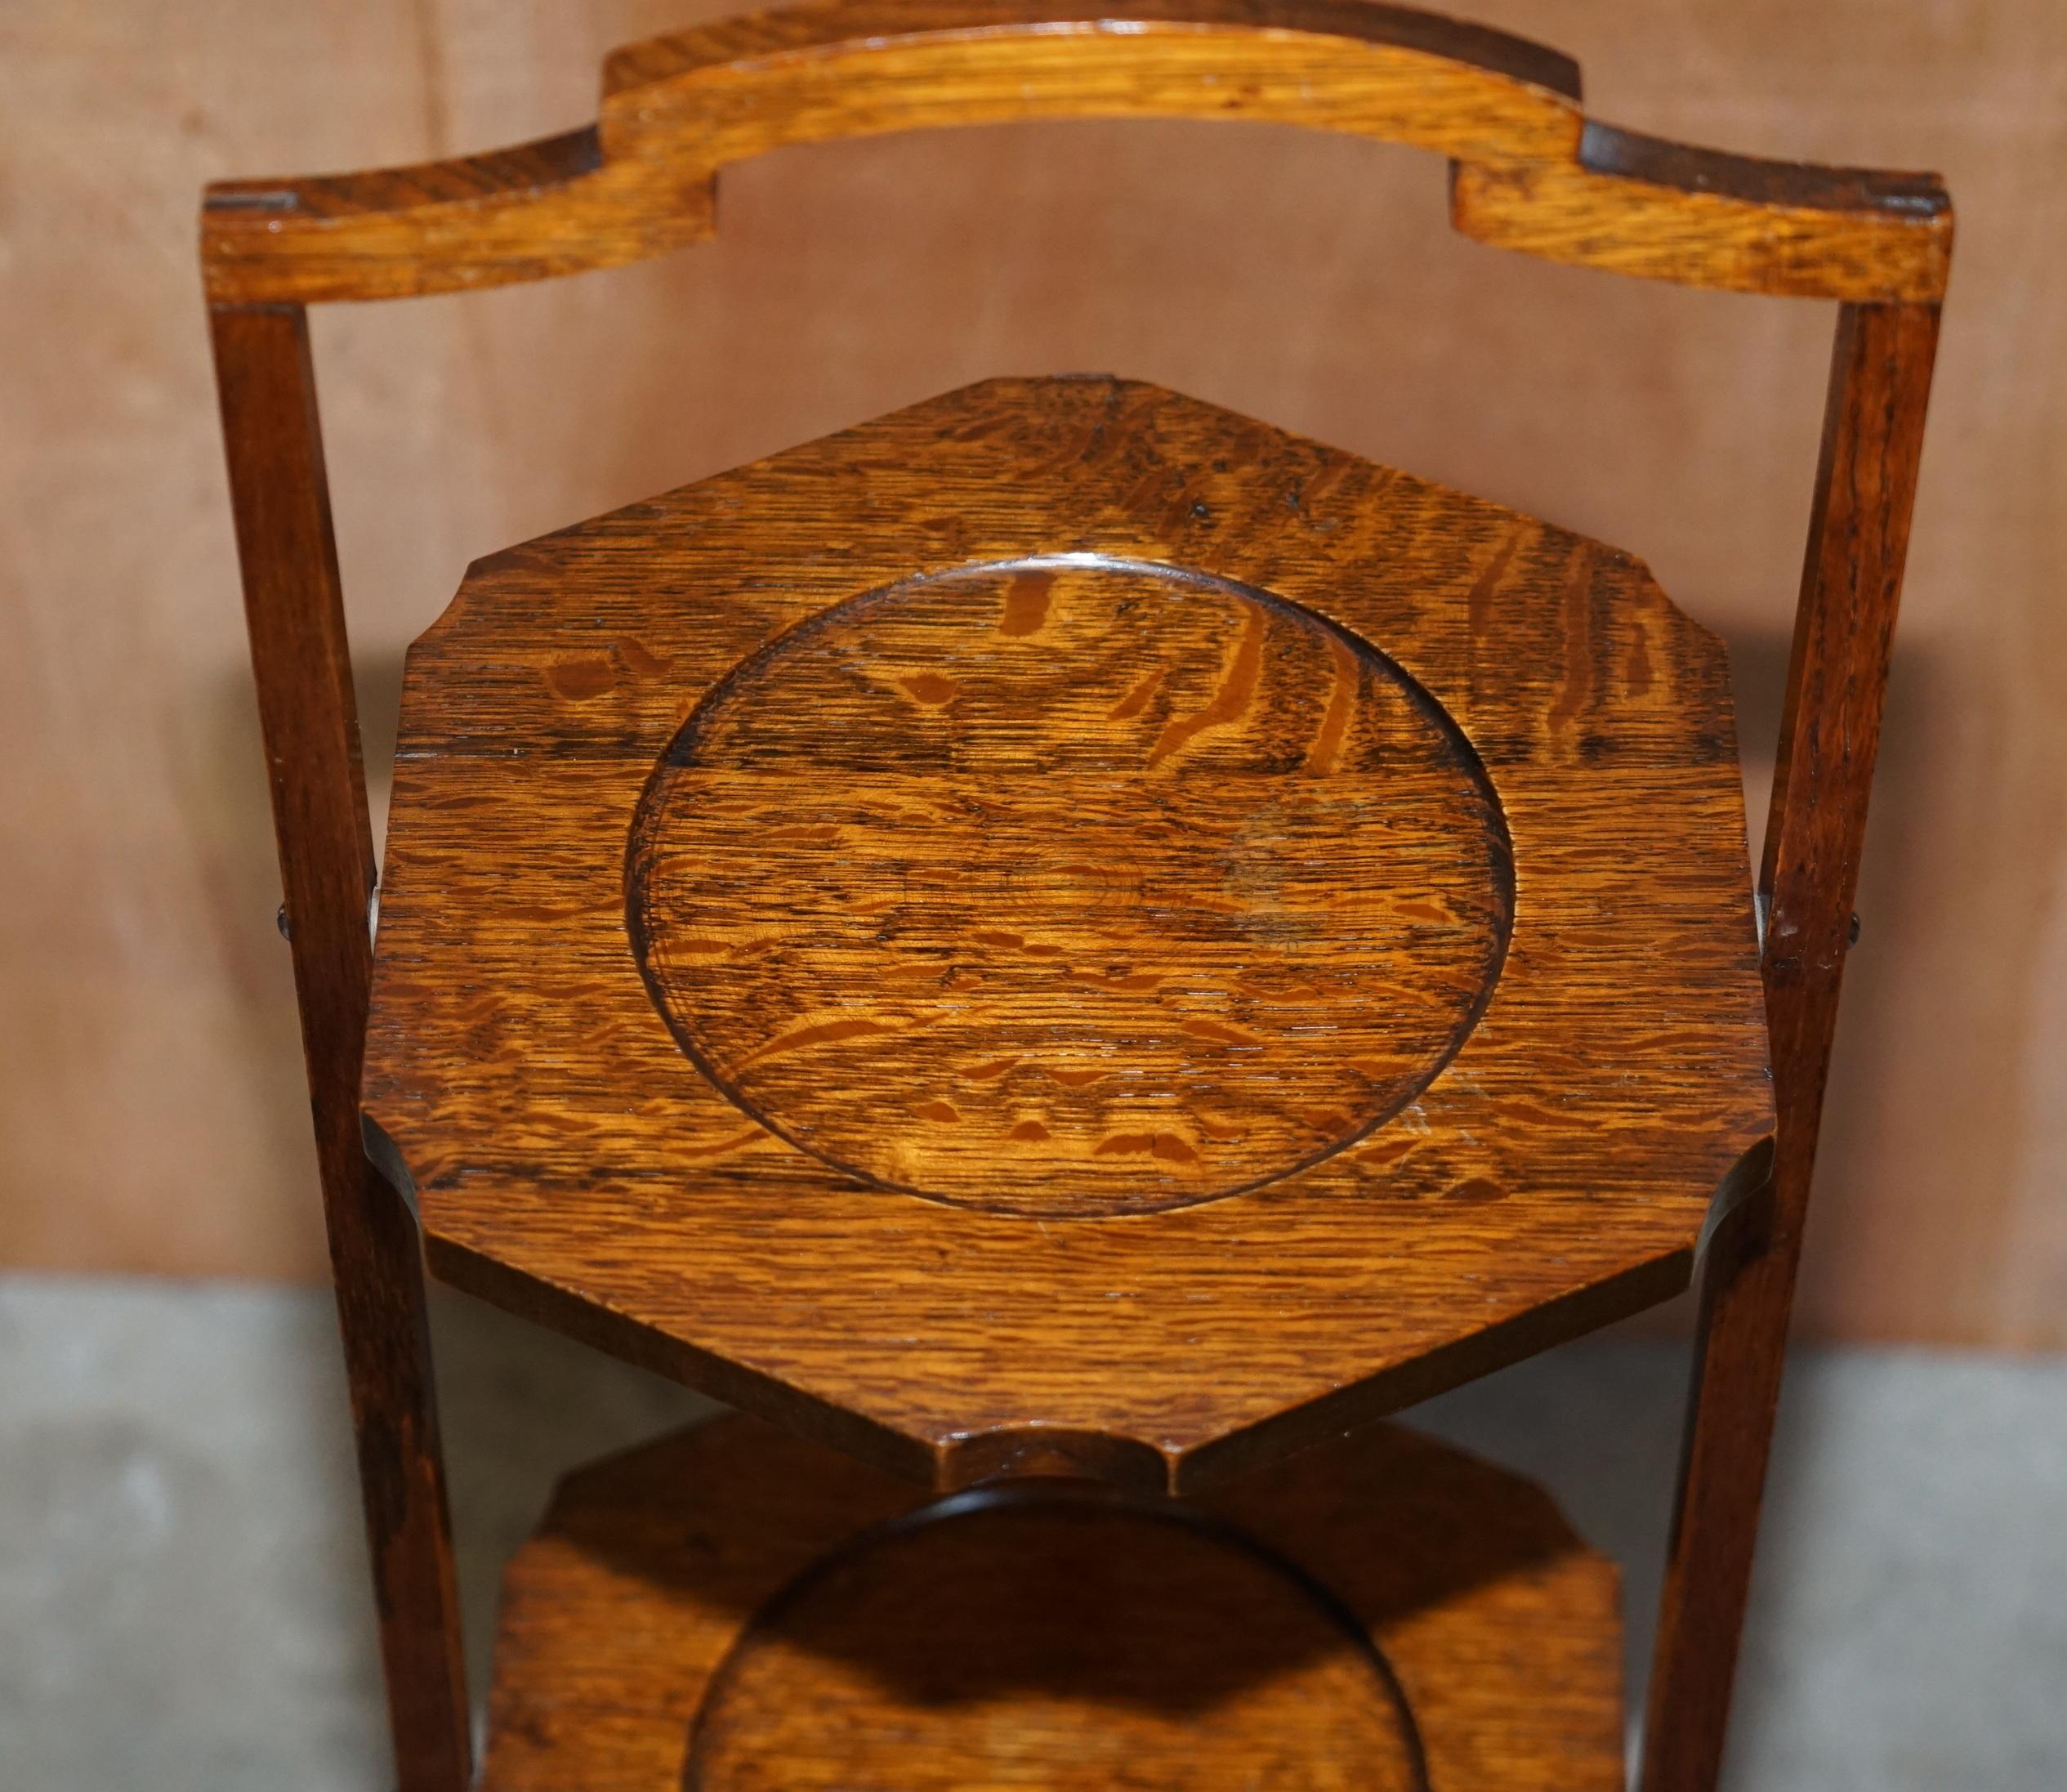 Early 20th Century Edwardian English Oak Folding Whatnot Display Table or Cake Stand Lovely Patina